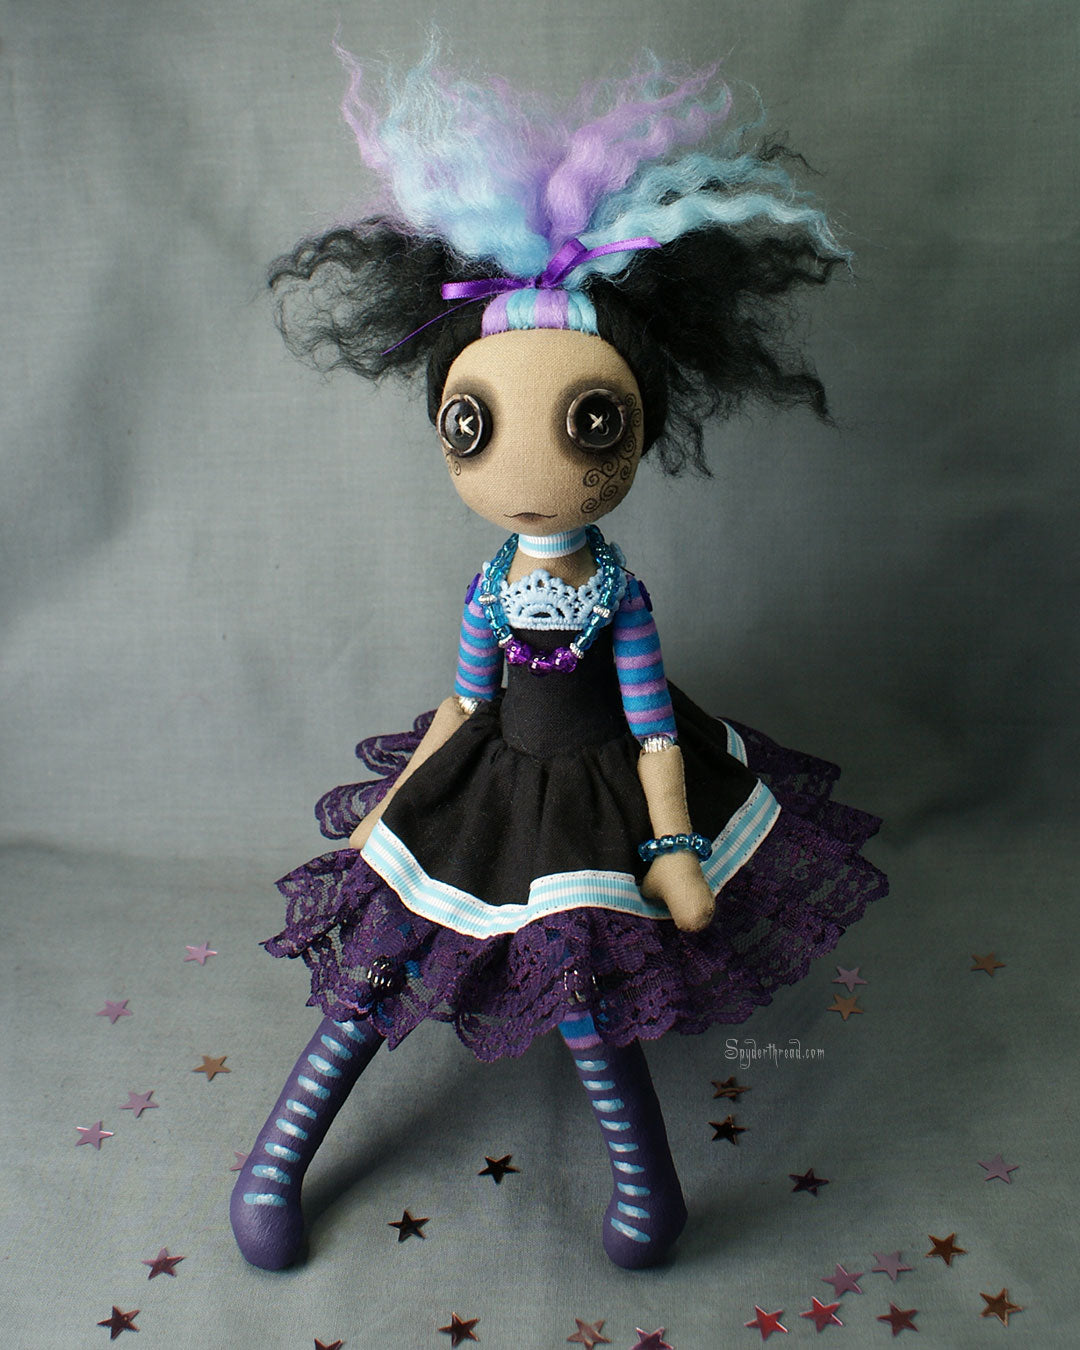 BAME brown skin tone button eyed Gothic style doll in black purple and blue dress with purple lace up boots